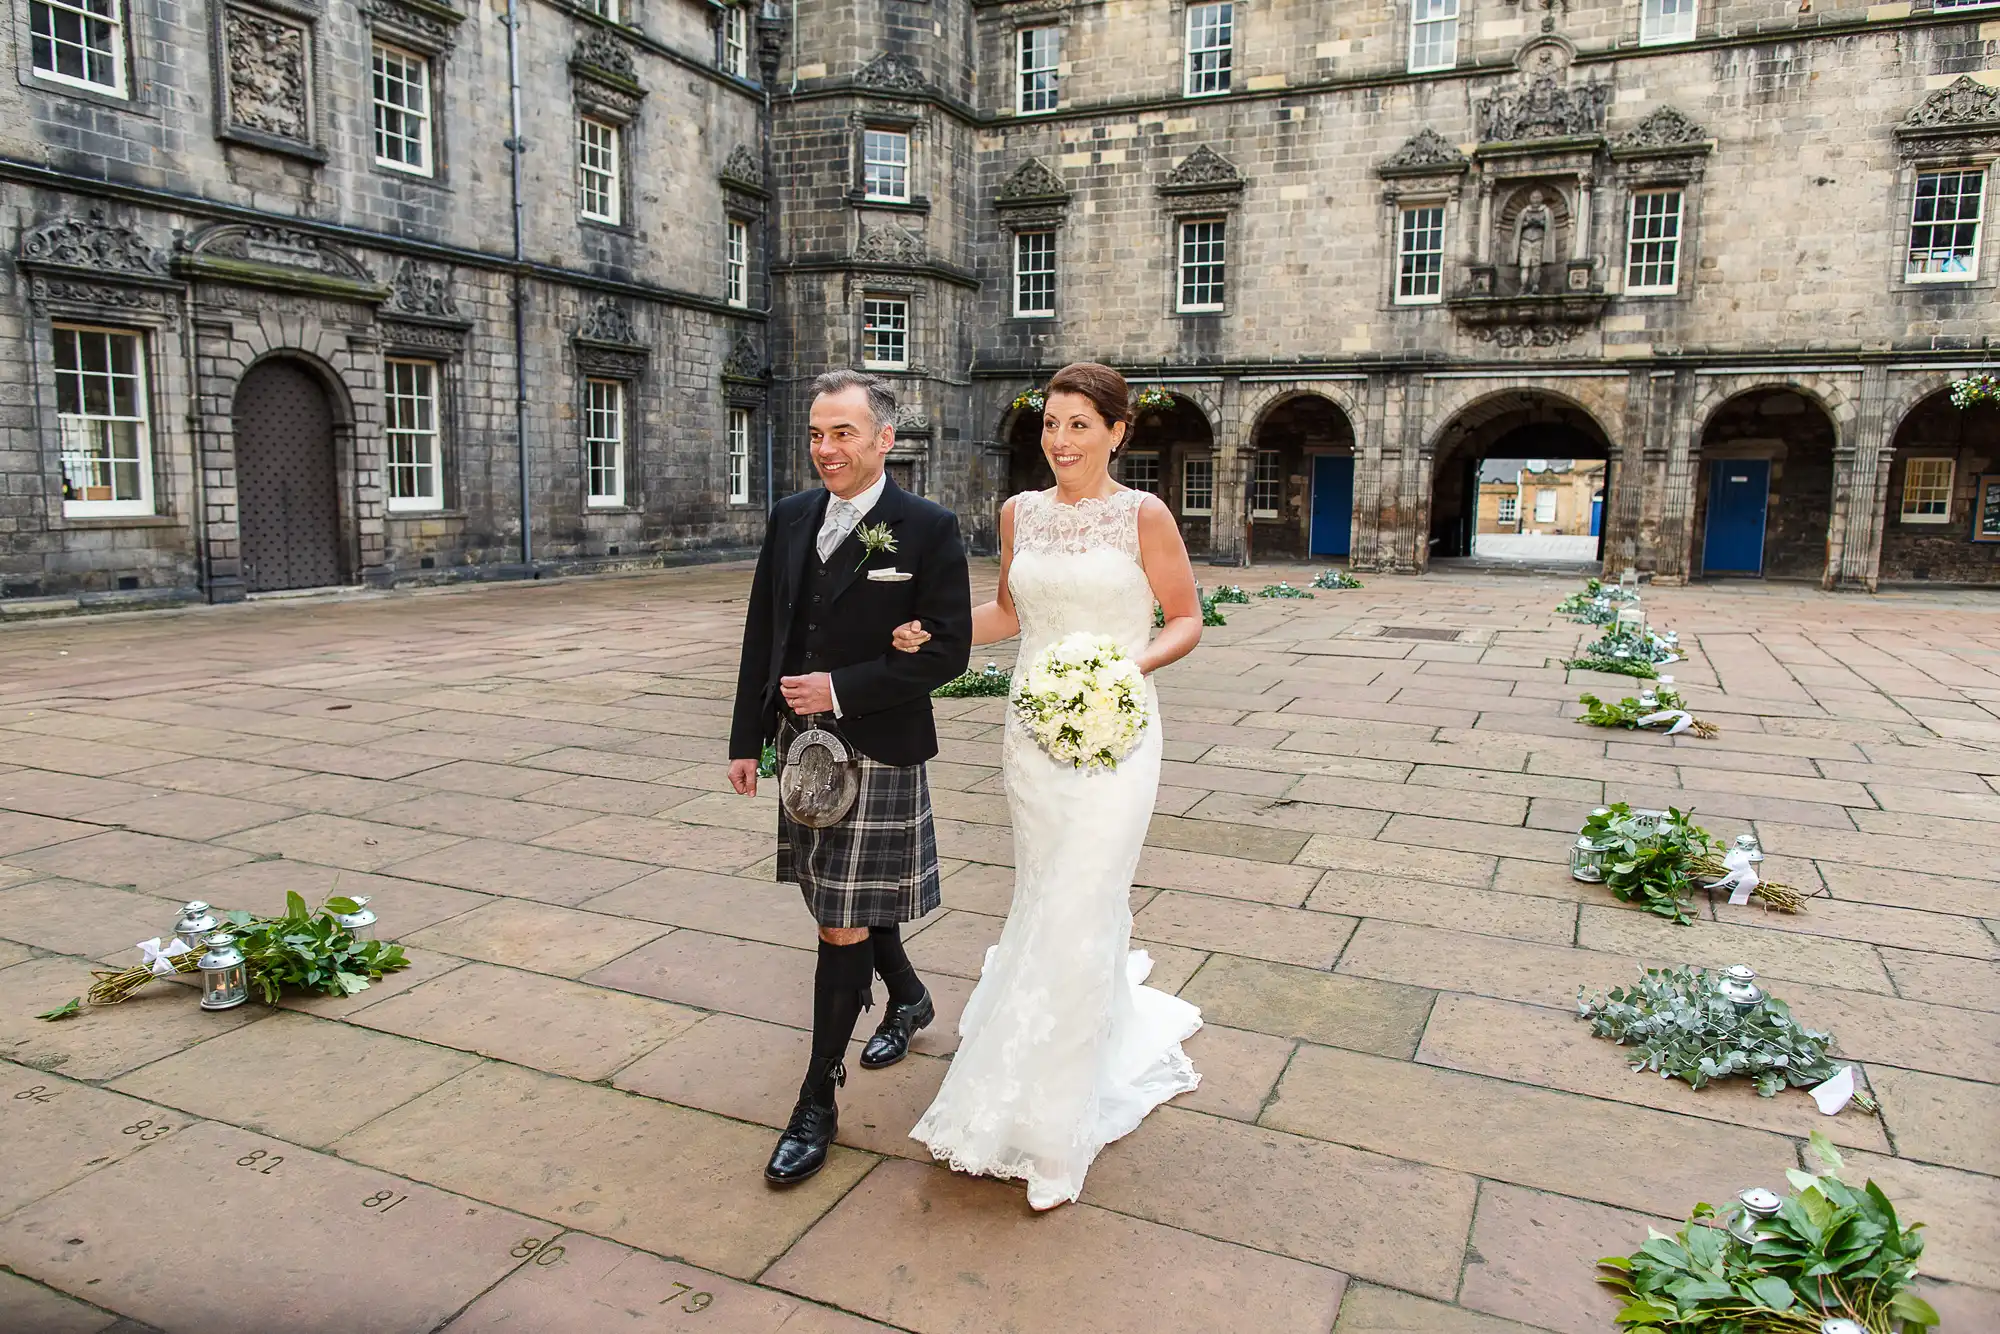 A bride in a white dress and a groom in a kilt and black jacket walk hand-in-hand across a courtyard with historic stone buildings in the background.